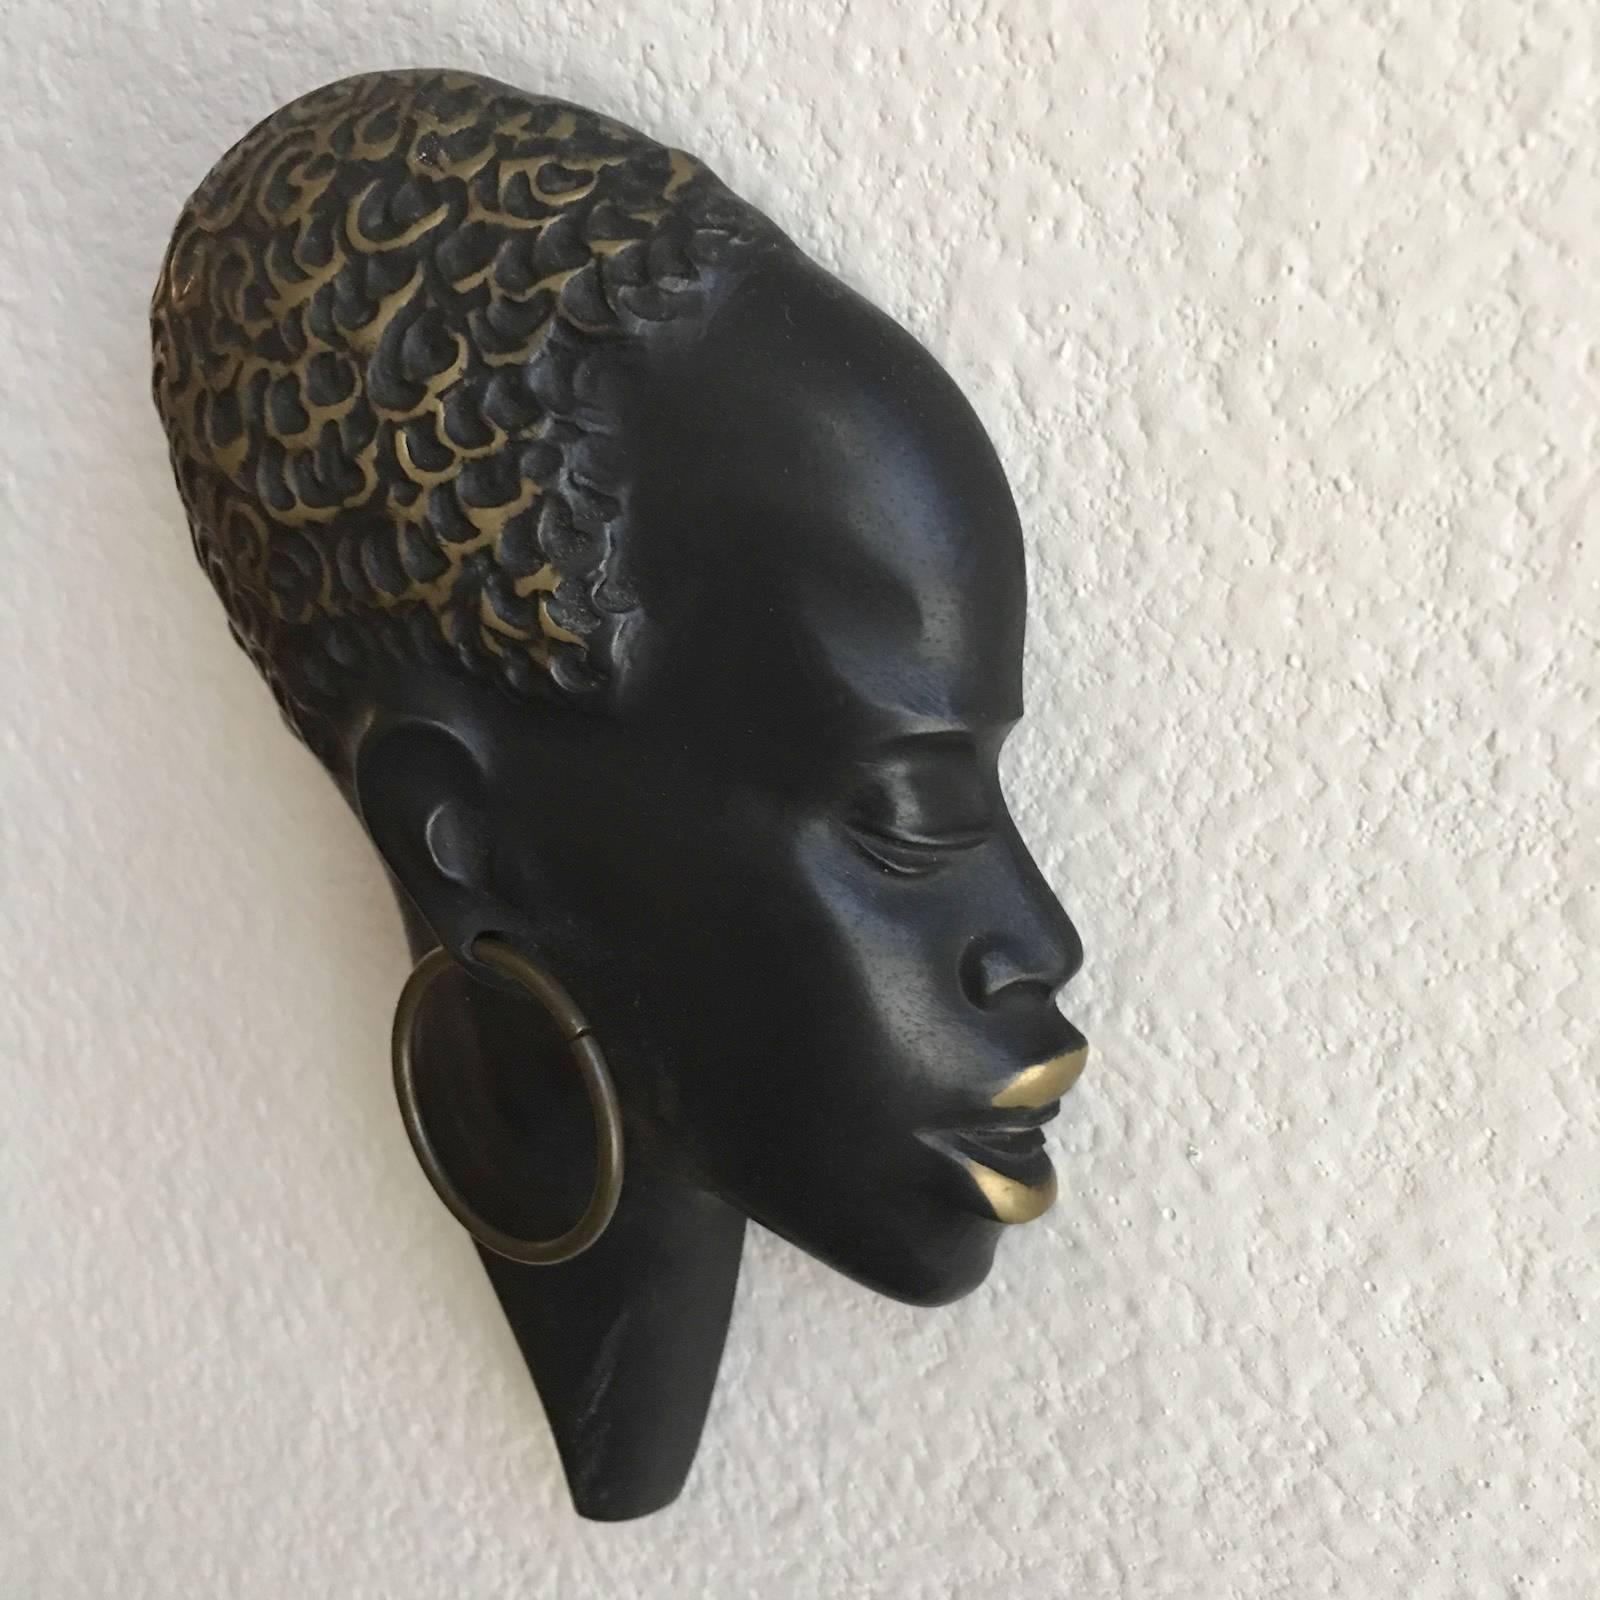 A beautiful modernist brass head of an African woman in the style of Werkstatte Hagenauer. Made in Austria in the 1950s. In very good condition with charming patina. Beautiful Wall Decoration piece. Free shipping in the USA.